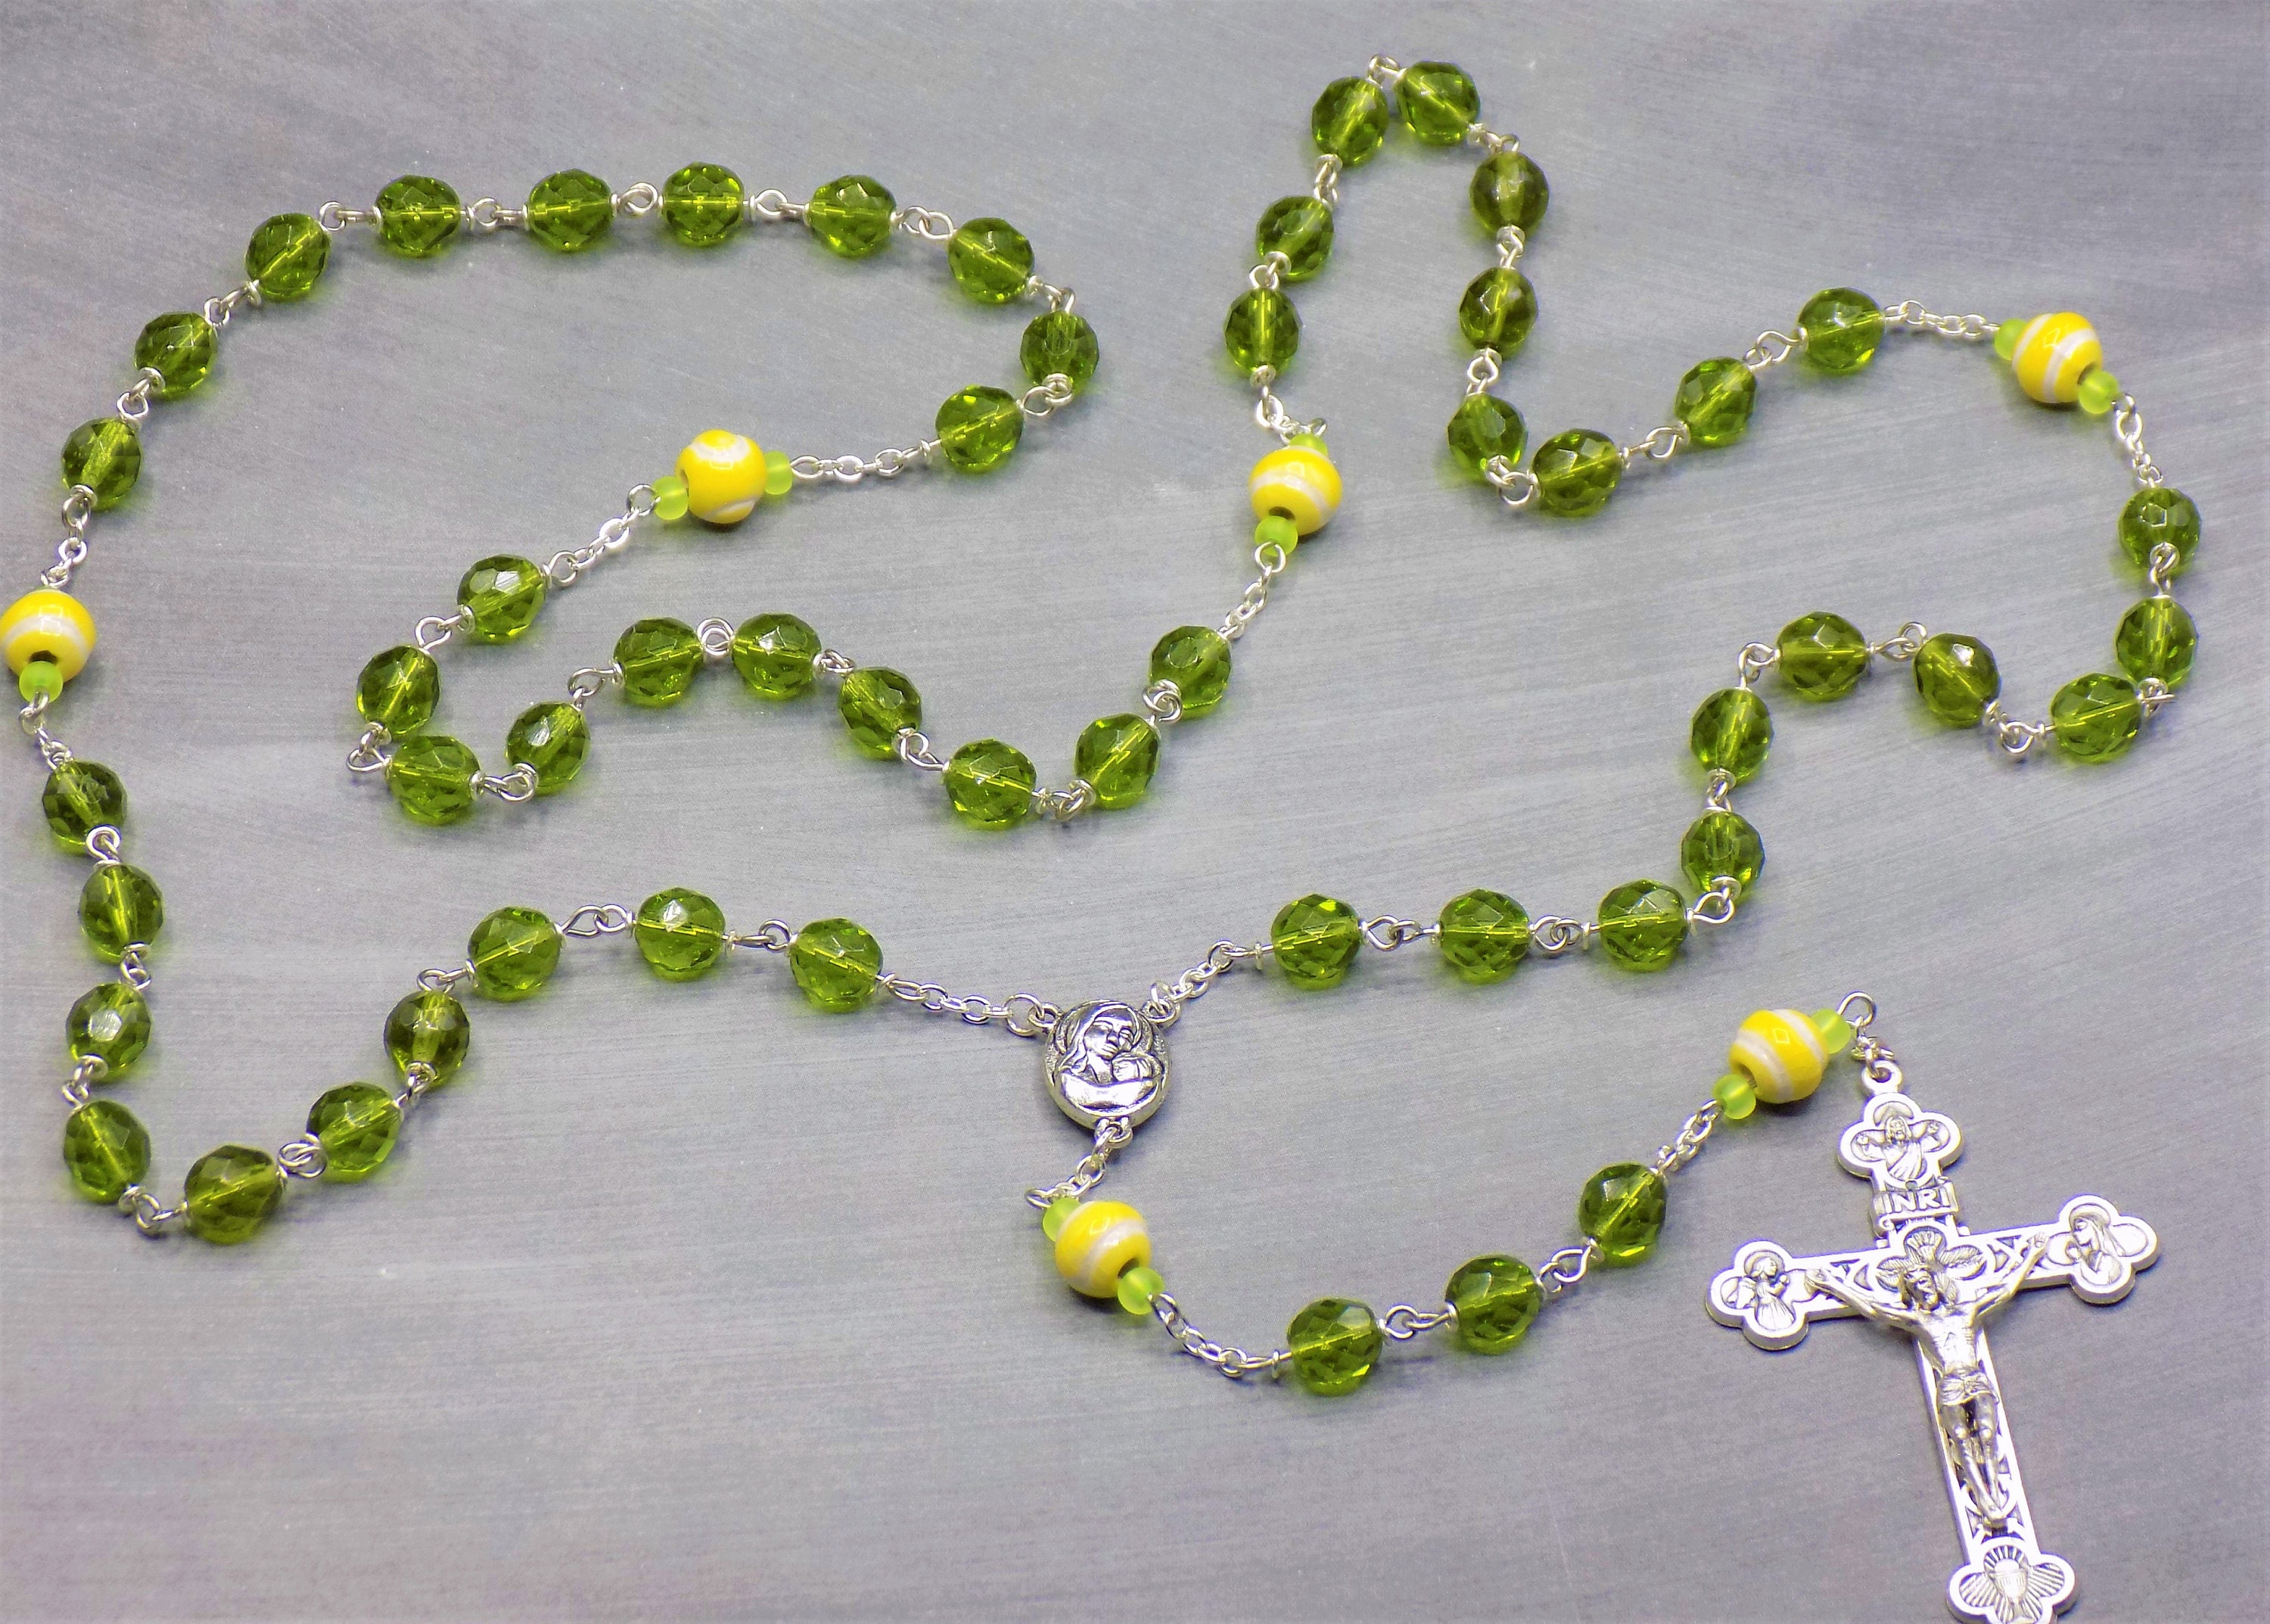 Rosary with glass beads Rosary Beads Green Rosary Bead Glass rosary Rosary 